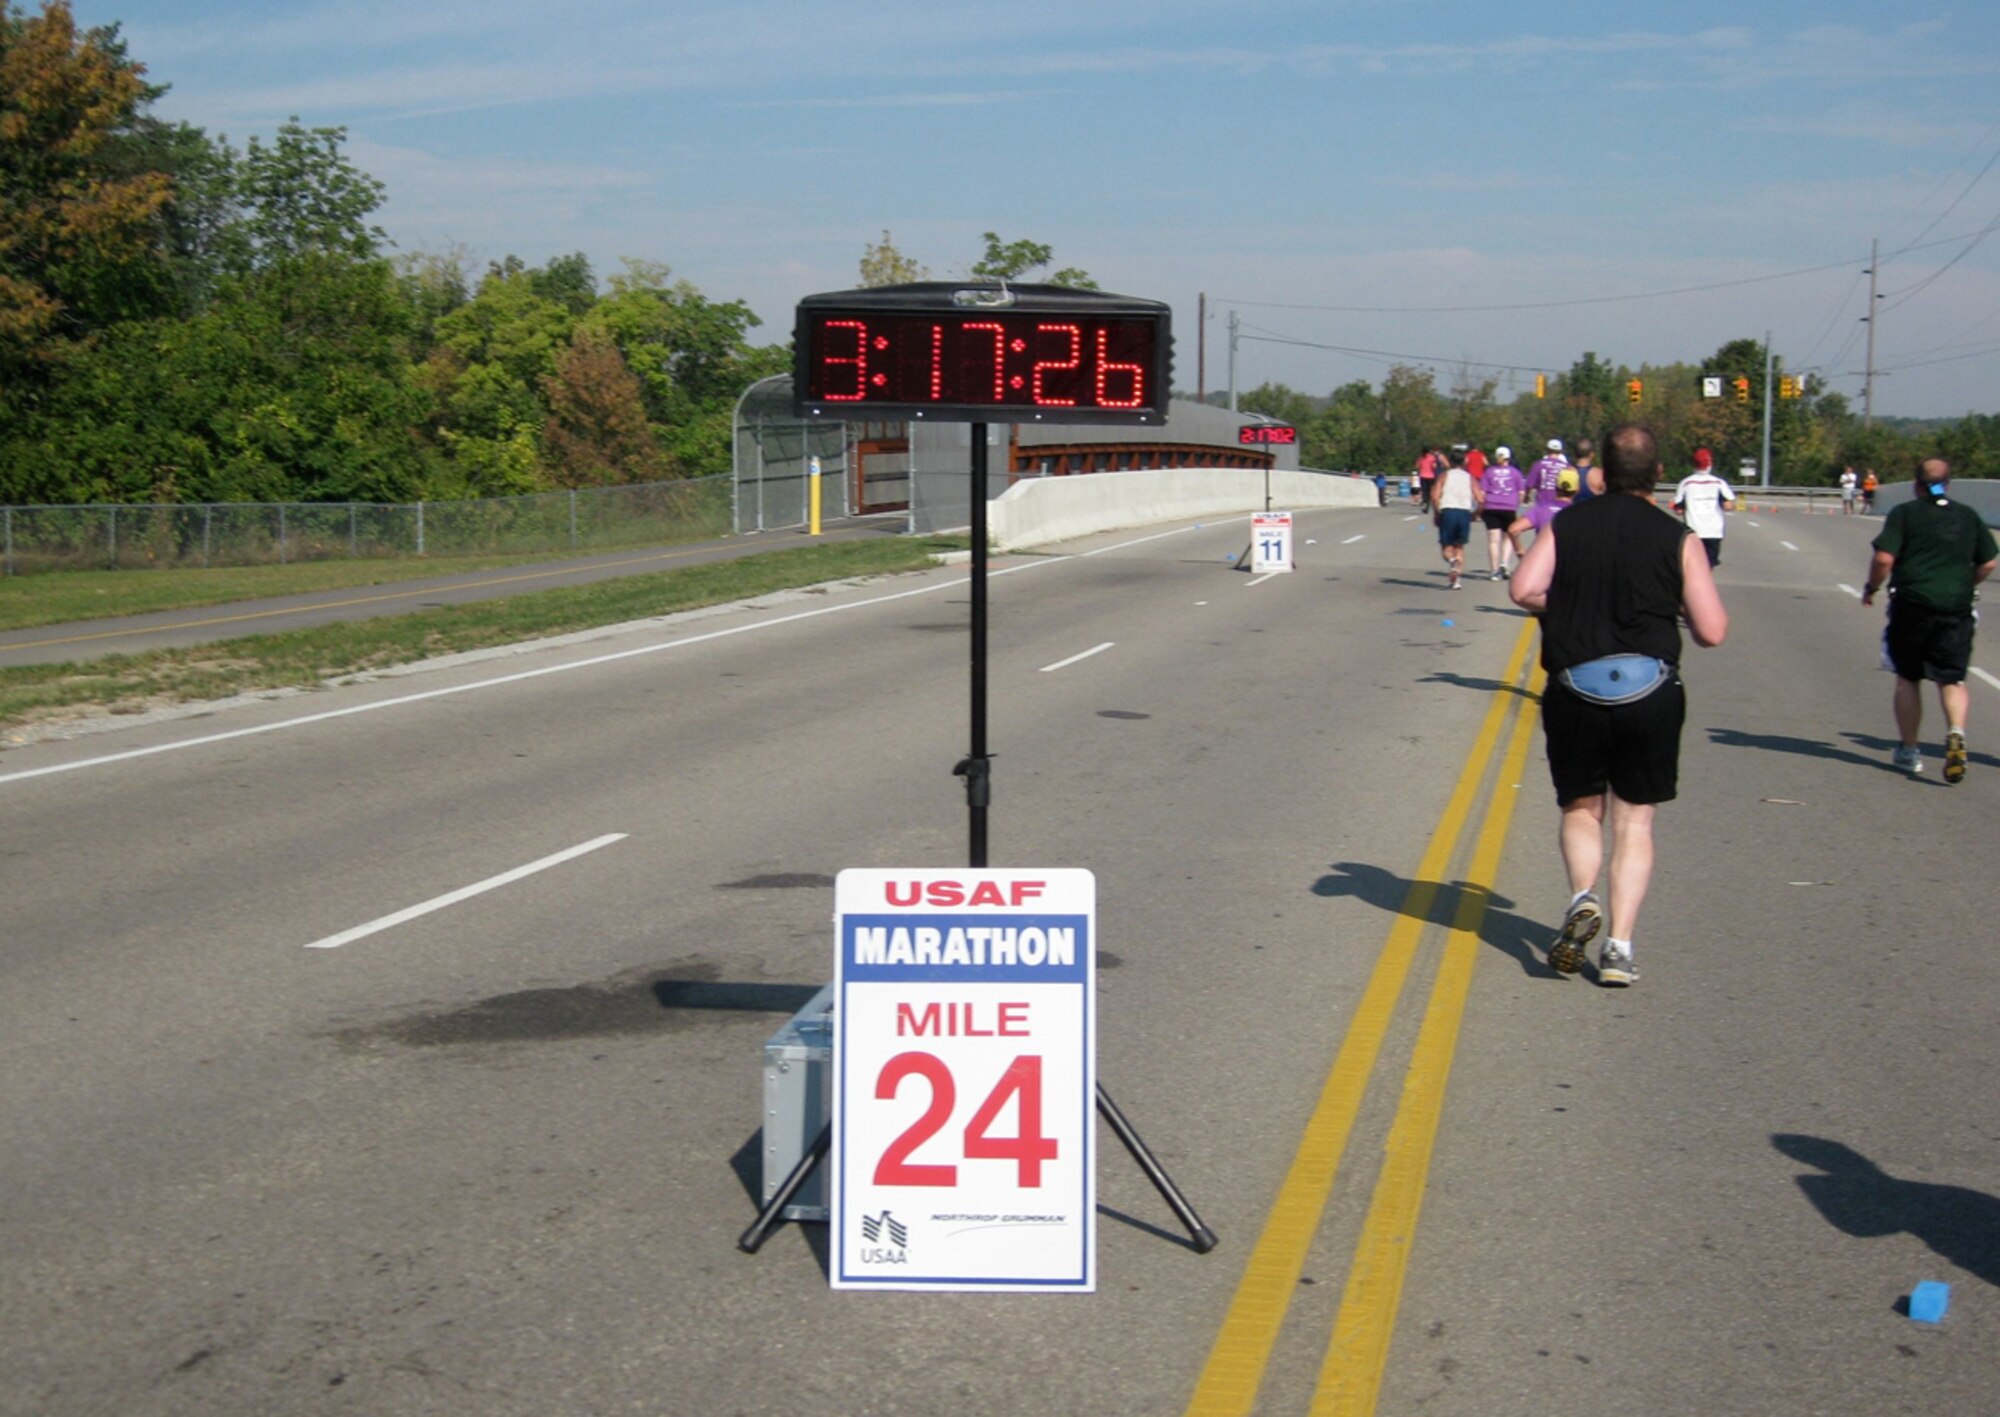 Runners pass by the 24-mile marker on their way to the finish line.

